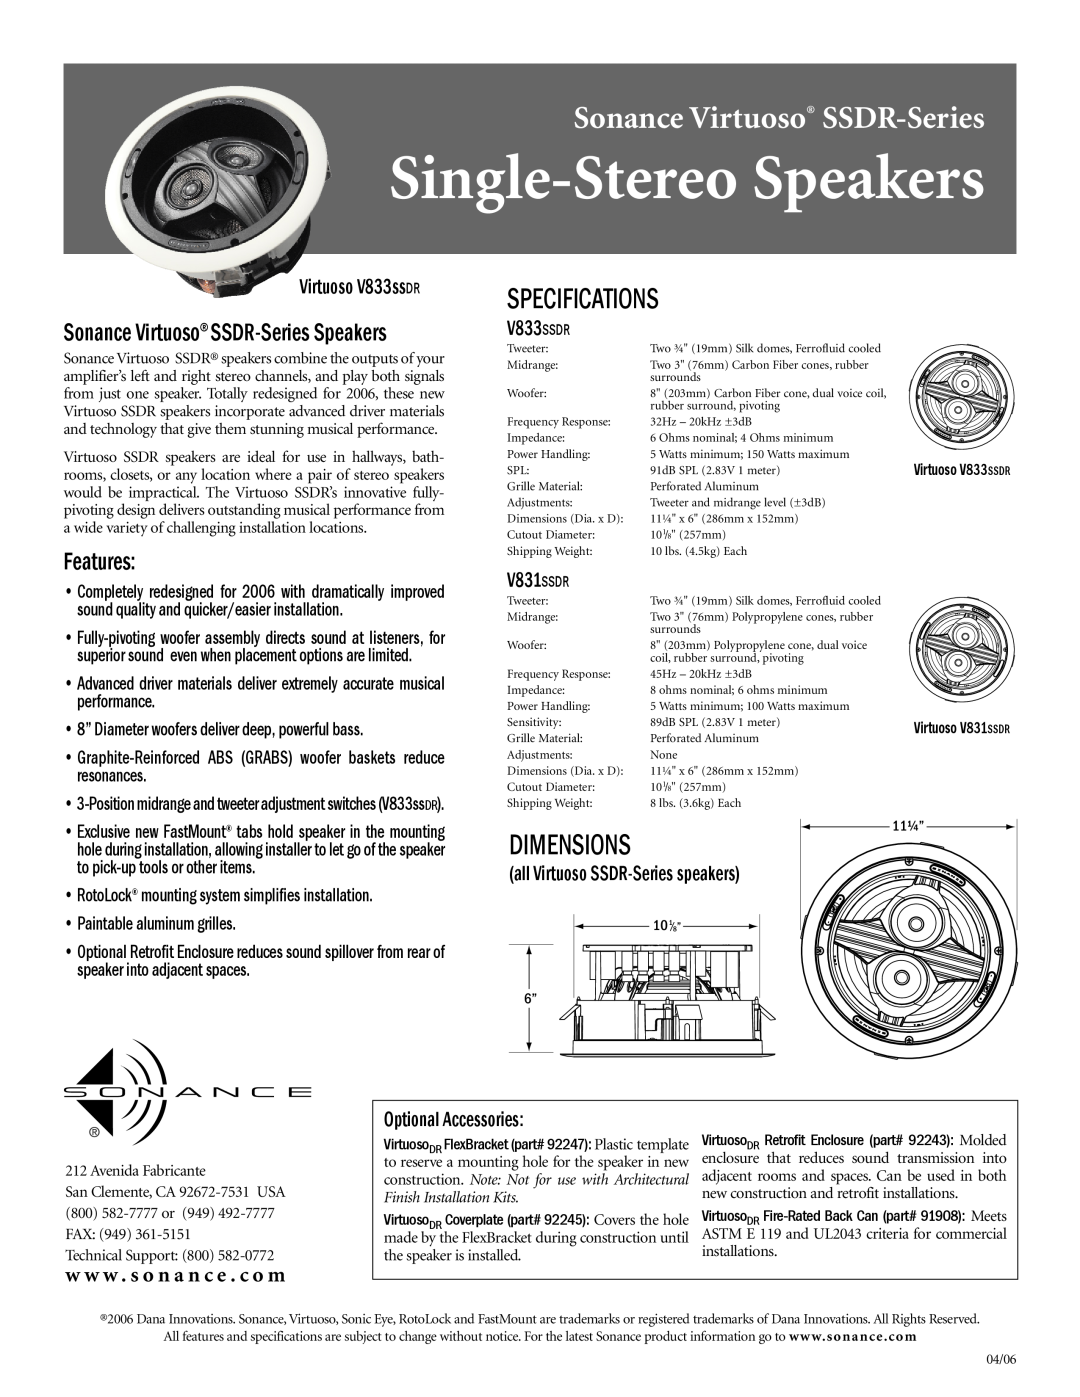 Sonance V831SSDR dimensions Single-StereoSpeakers, Sonance Virtuoso SSDR-Series, Specifications, Dimensions, Features 